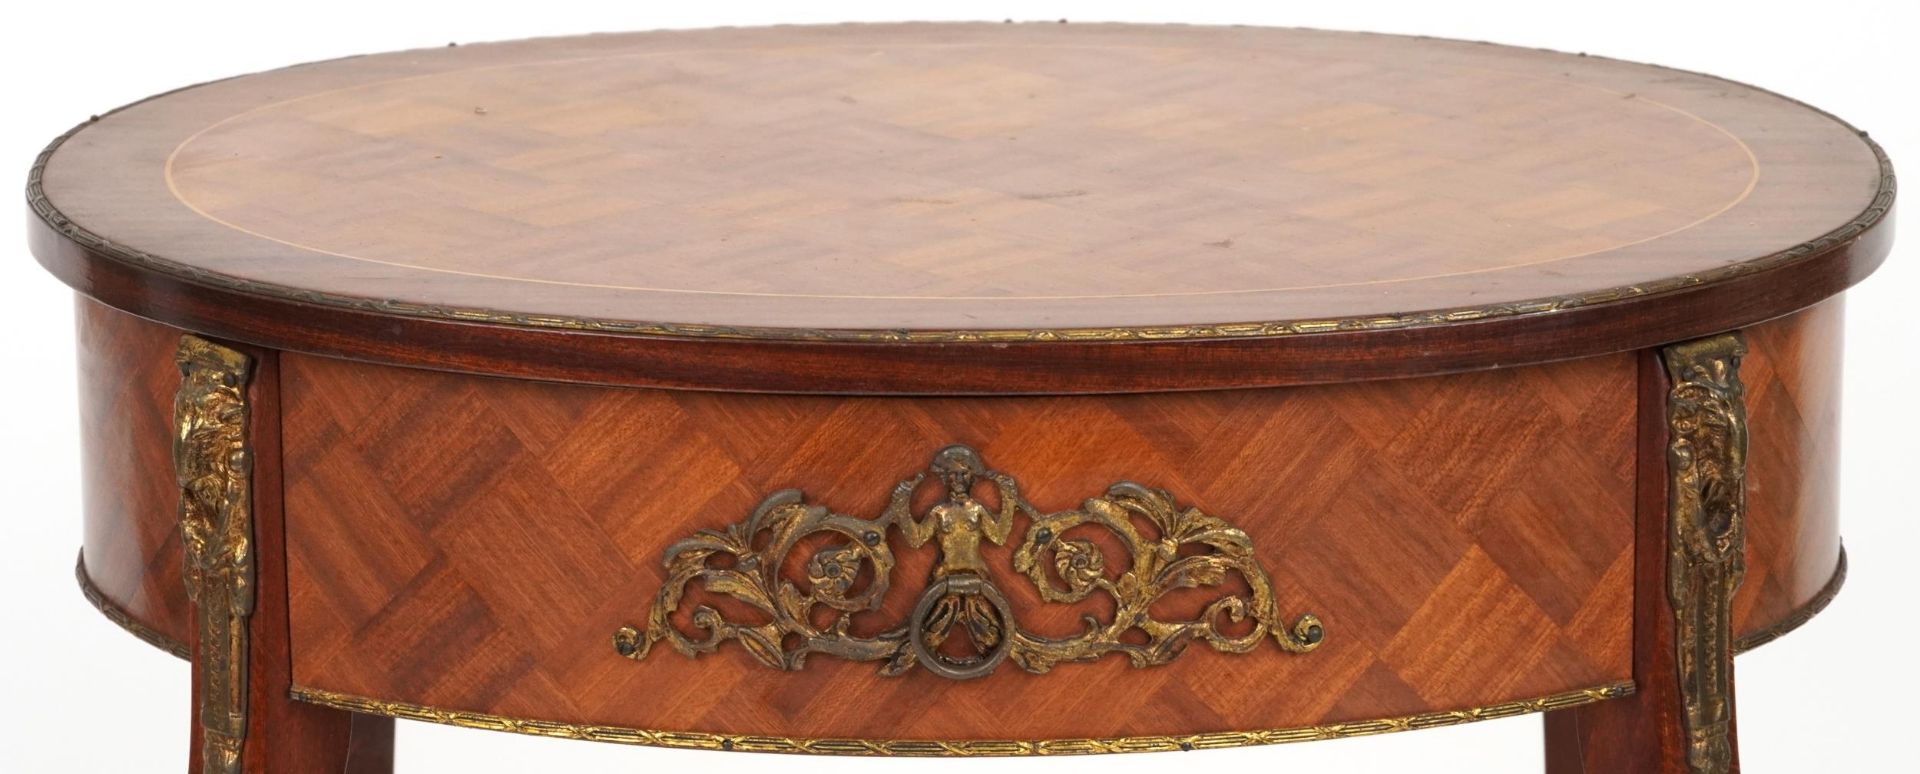 French Louis XV style oval inlaid kingwood side table with gilt metal mounts, frieze drawer and - Image 3 of 5